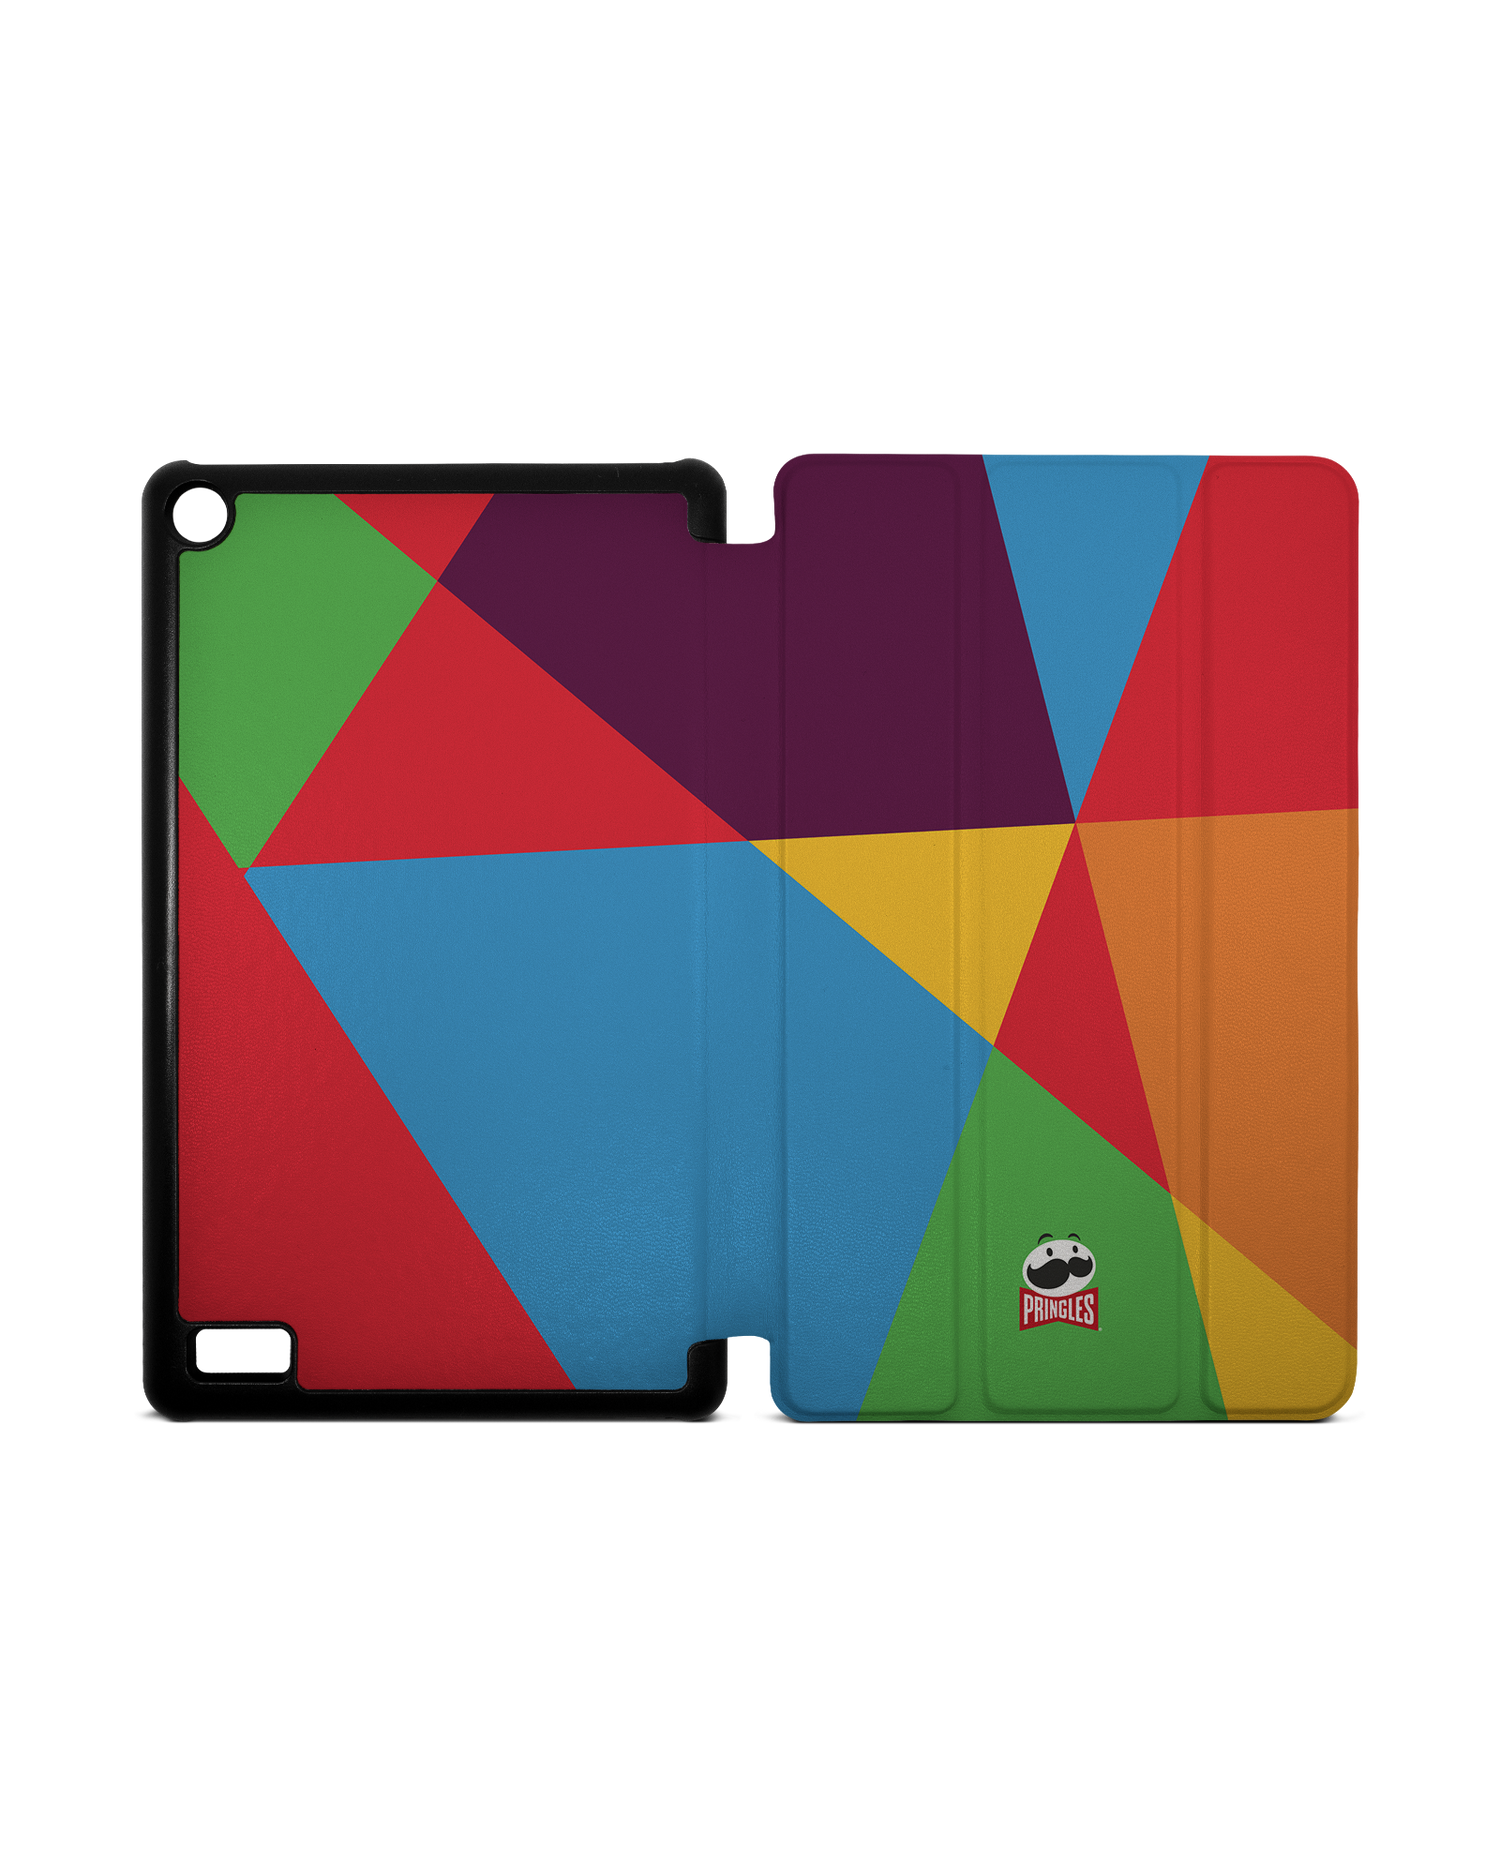 Pringles Abstract Tablet Smart Case for Amazon Fire 7: Opened